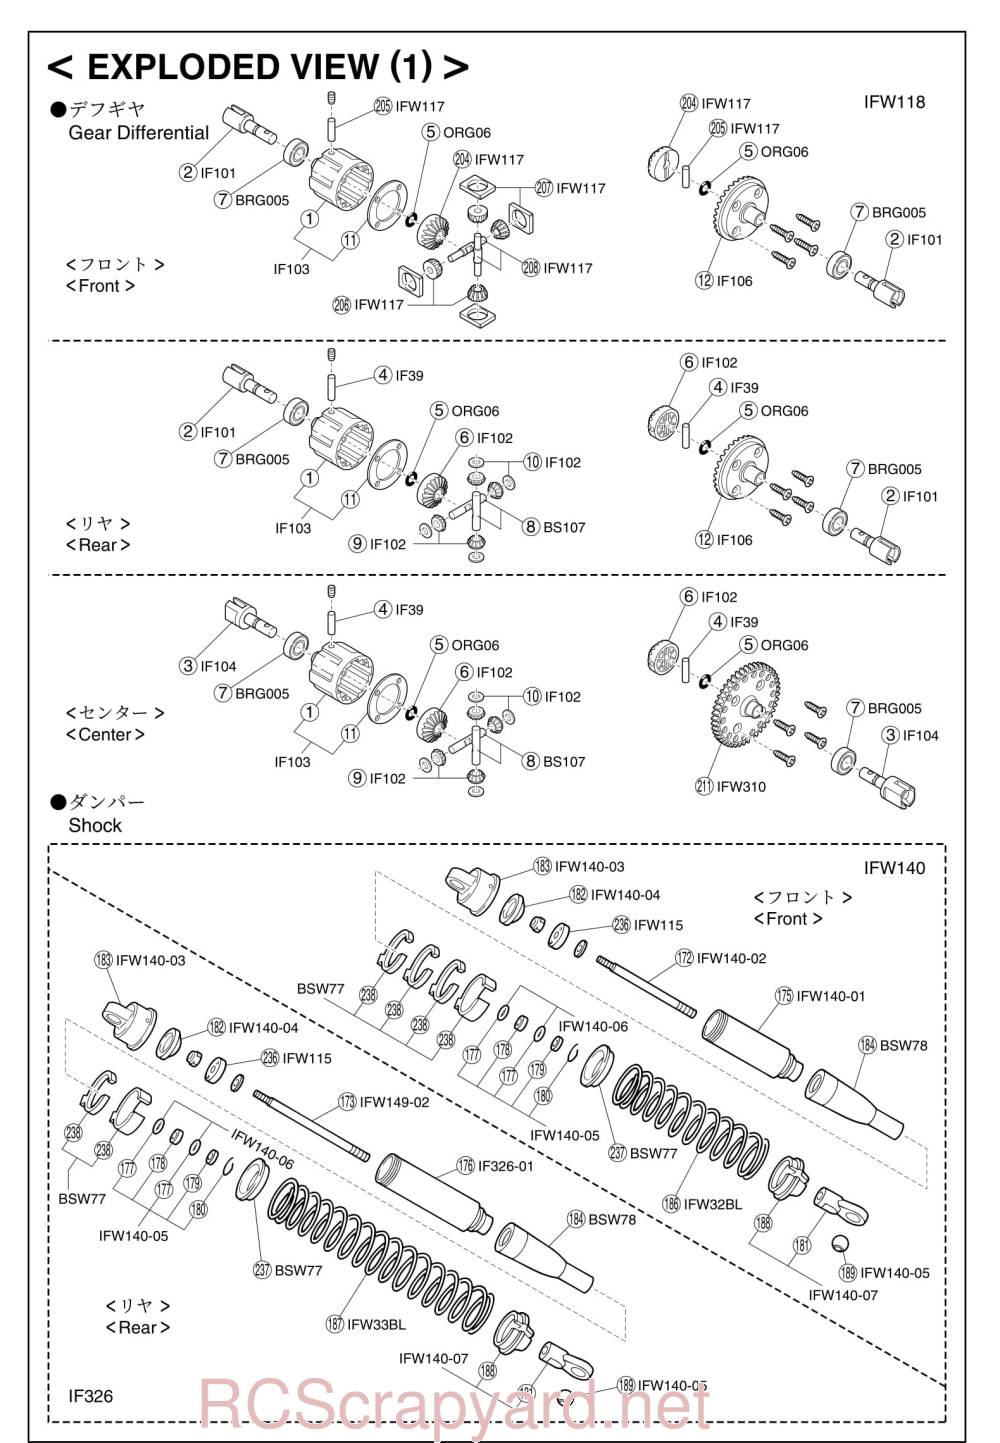 Kyosho Inferno MP-777 SP1 - 31778 - Exploded View - Page 2